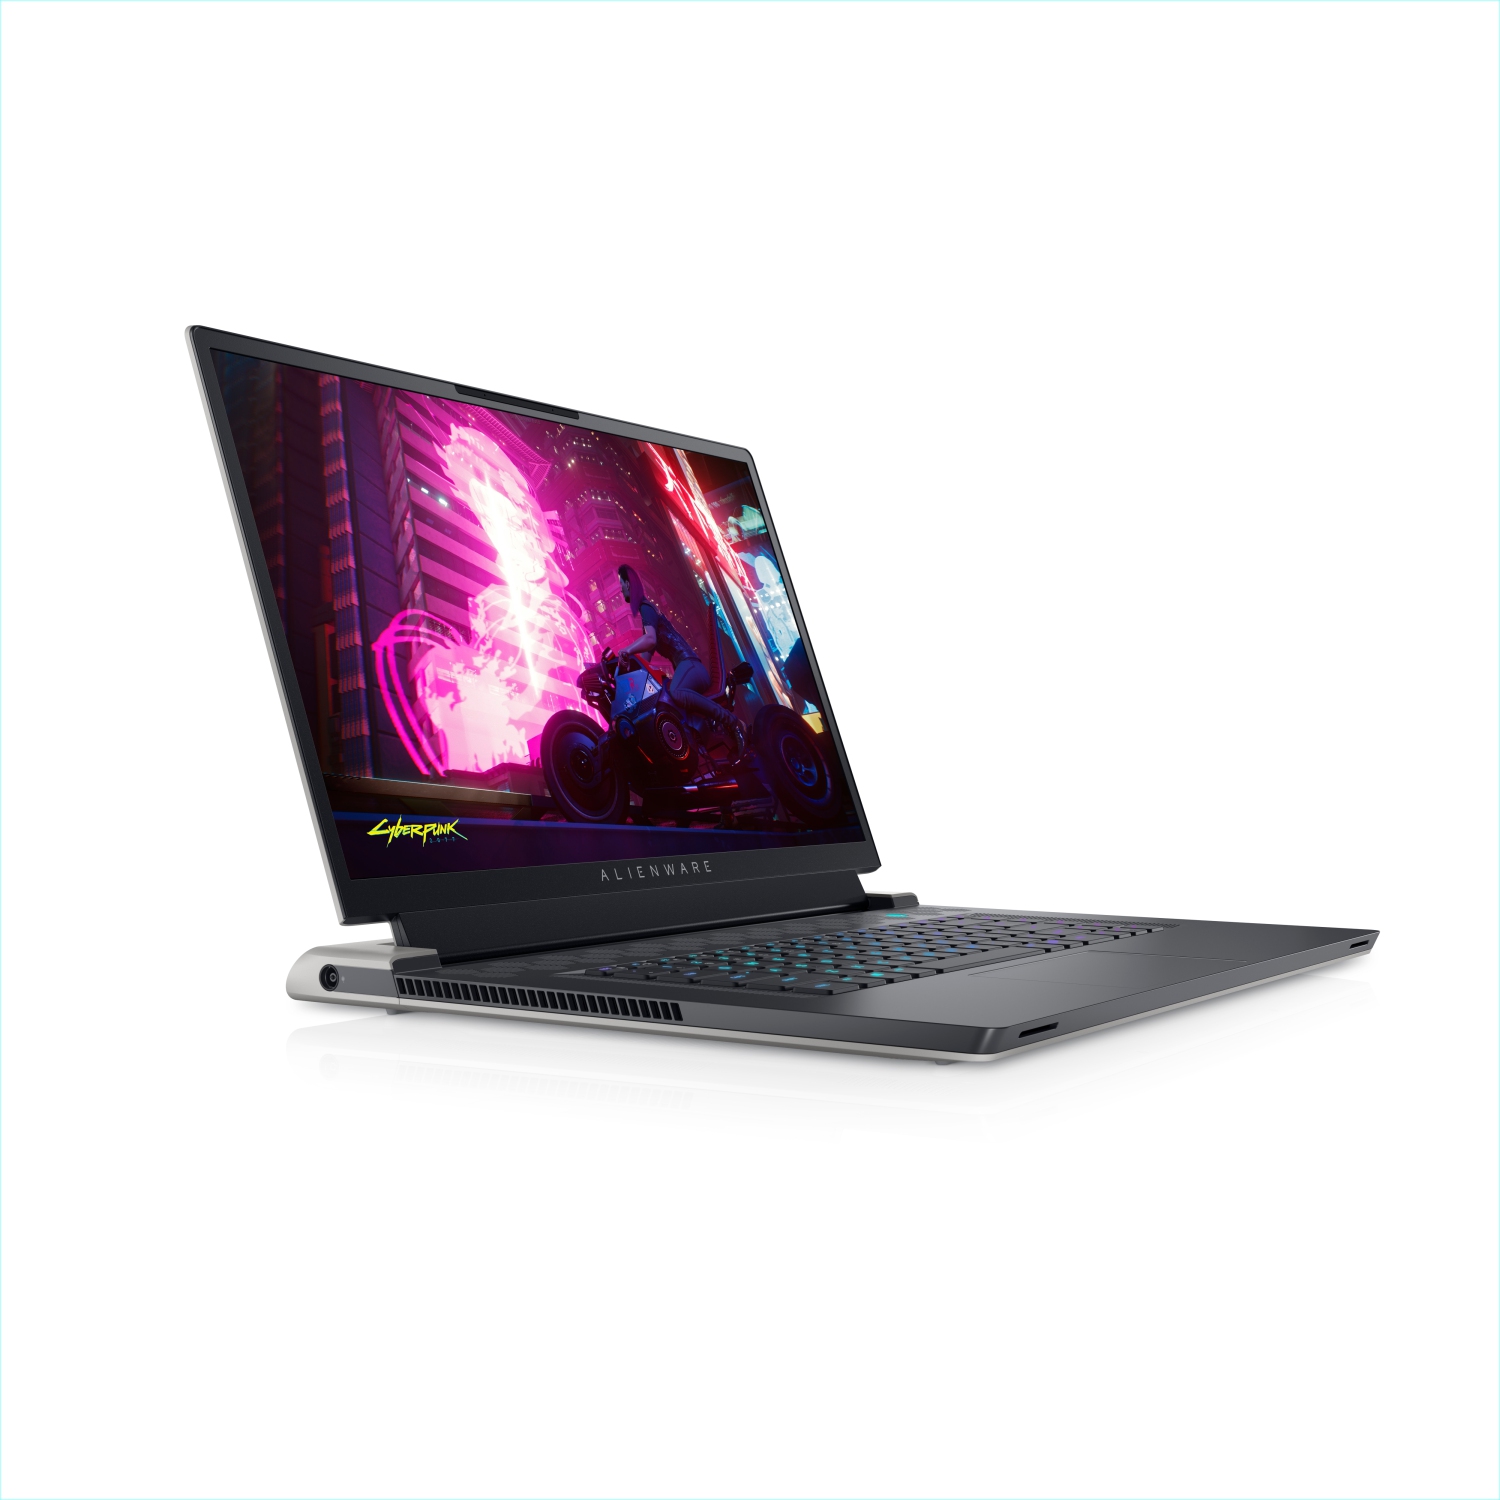 Refurbished (Excellent) - Dell Alienware X17 R1 Gaming Laptop (2021), 17.3" 4K, Core i7, 1TB SSD, 32GB RAM, RTX 3070, 8 Cores @ 4.6 GHz, 11th Gen CPU Certified